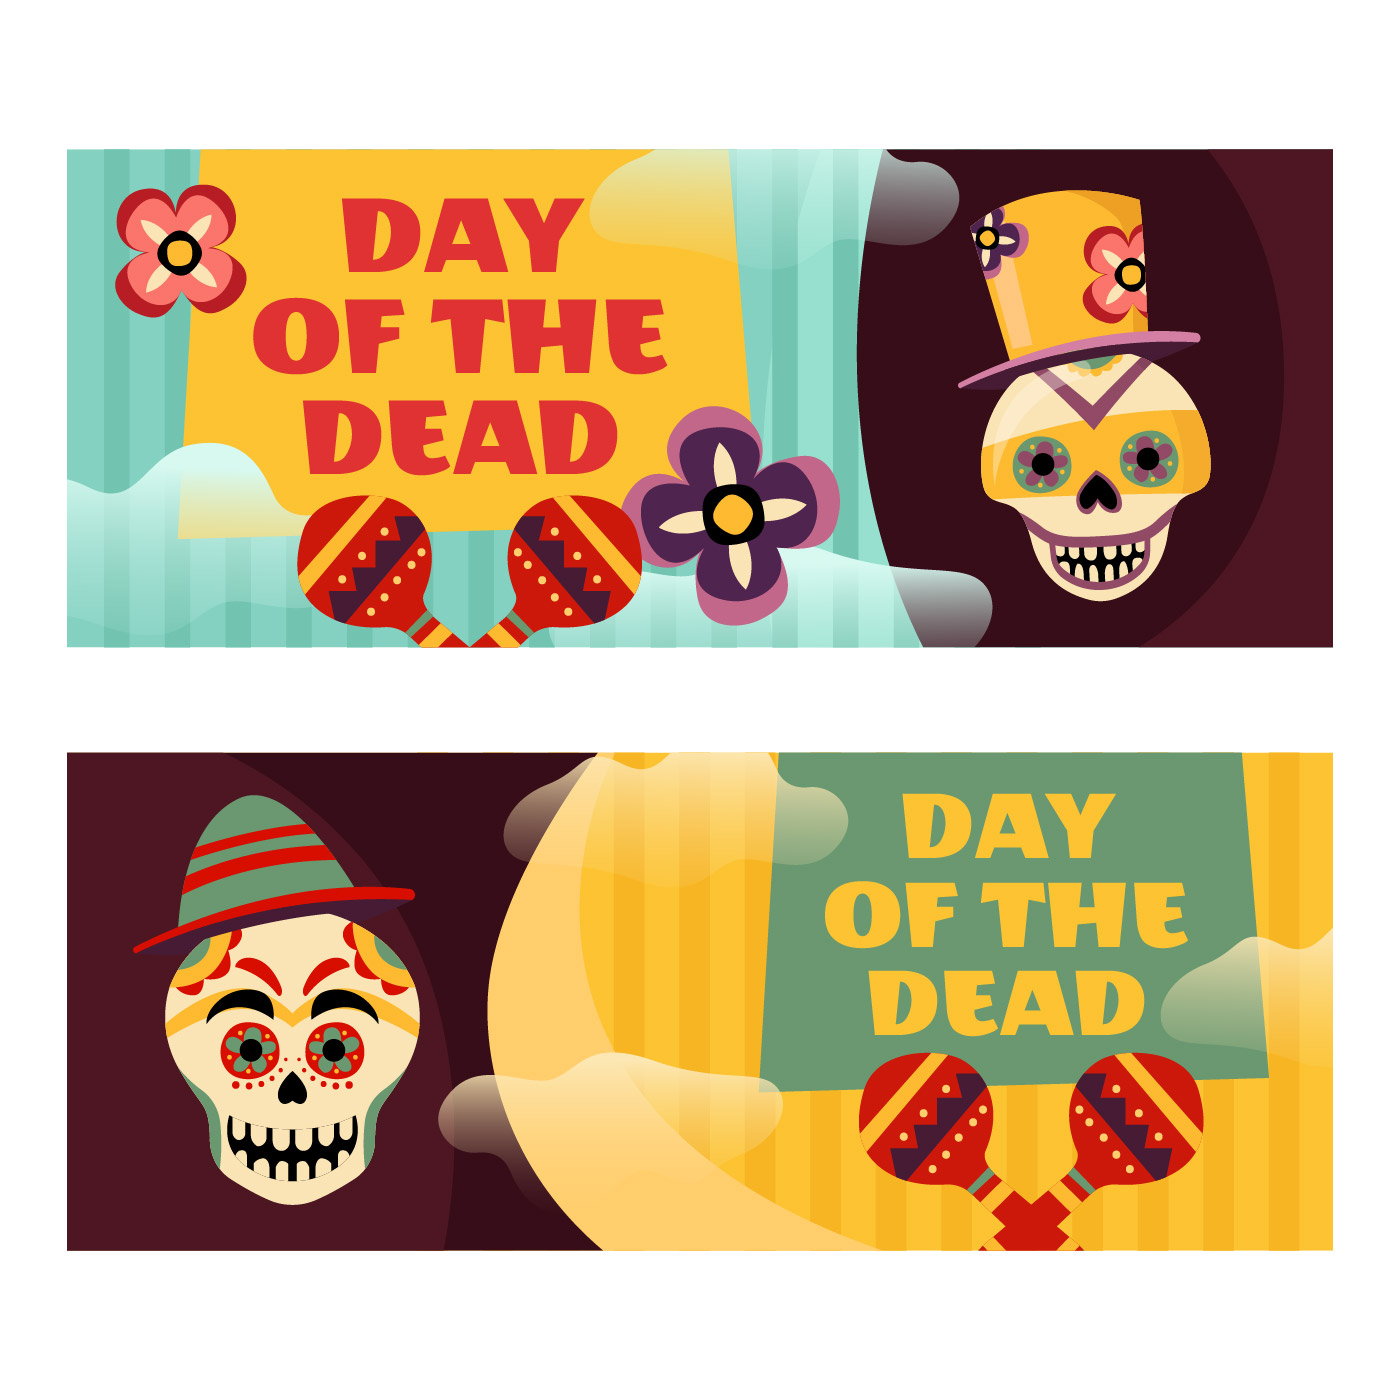 Download Day Of The Dead Vector Banner - Download Free Vectors ...